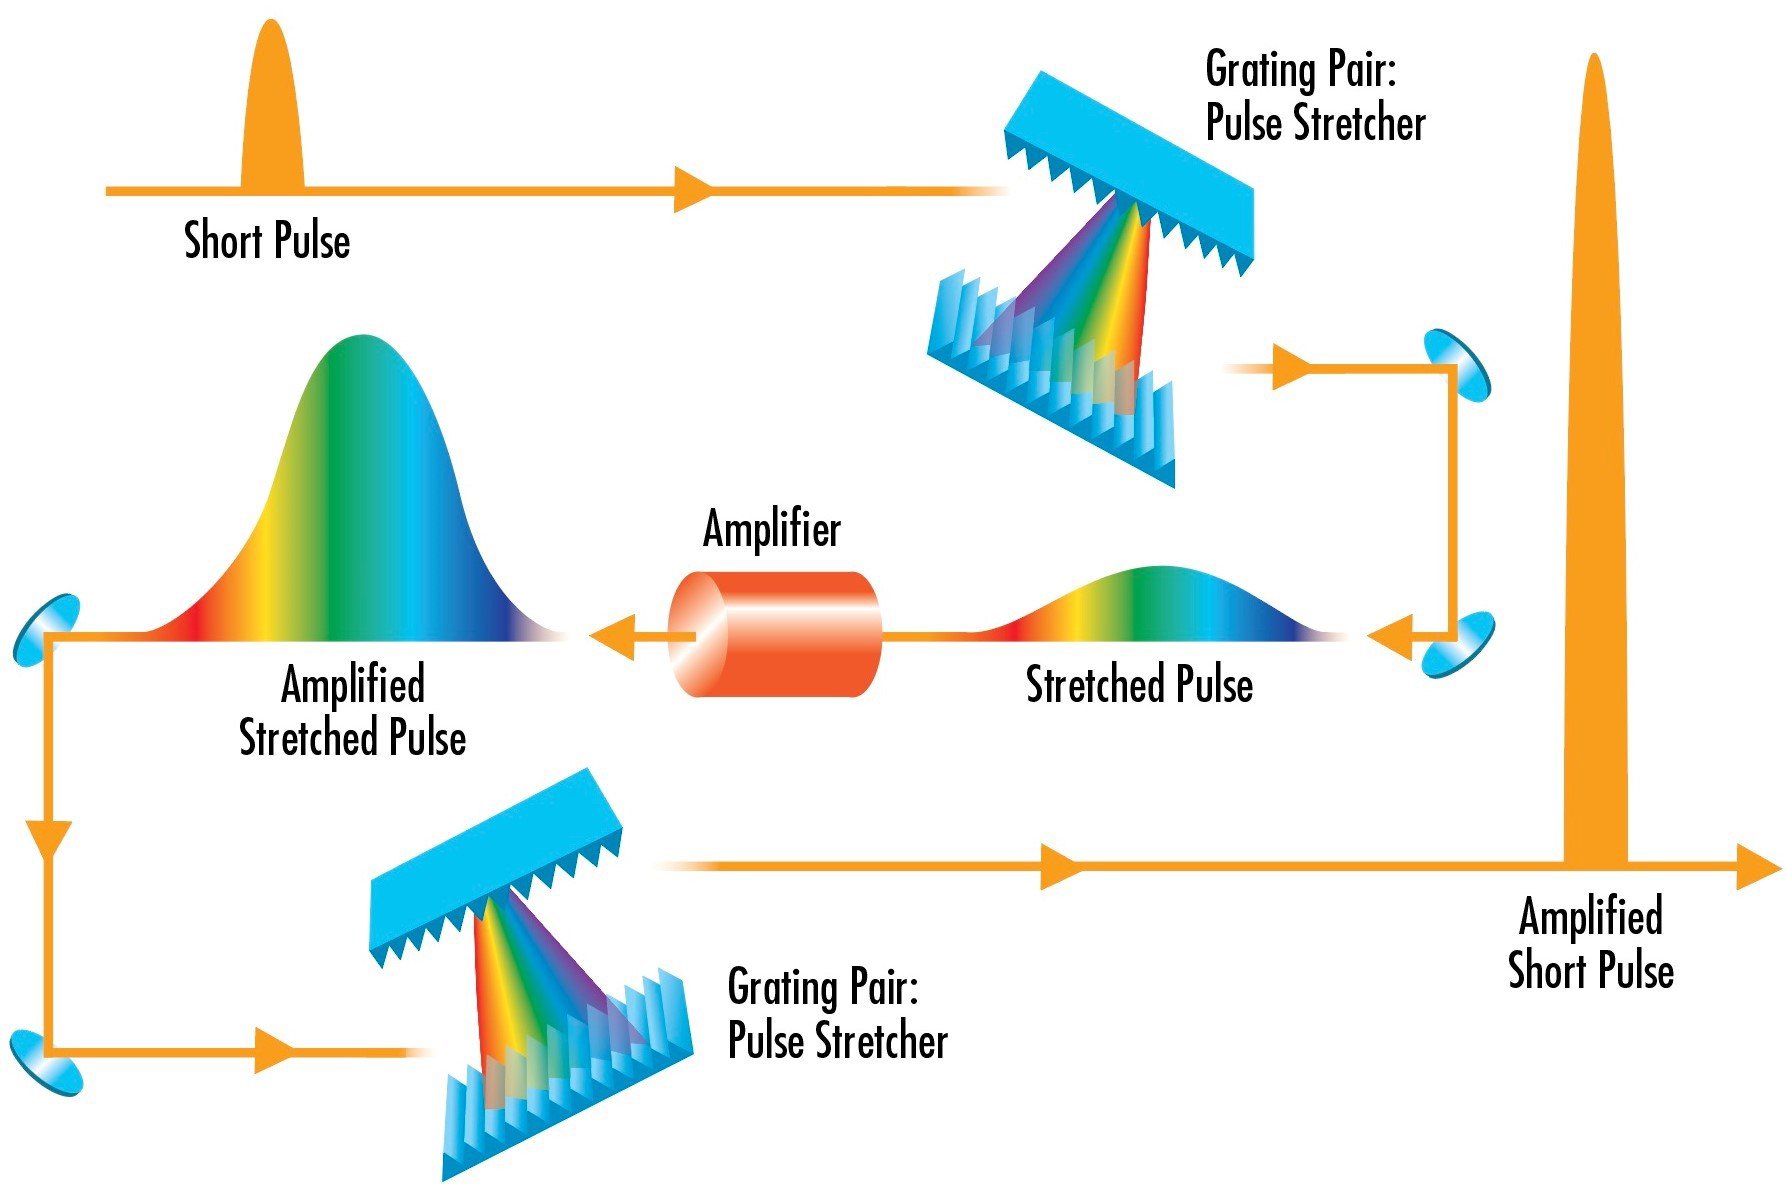 Gratings can be used in pulsed laser systems to both increase pulse duration to prevent laser-induced damage in the system and decrease pulse duration to result in a high-power pulse at the target